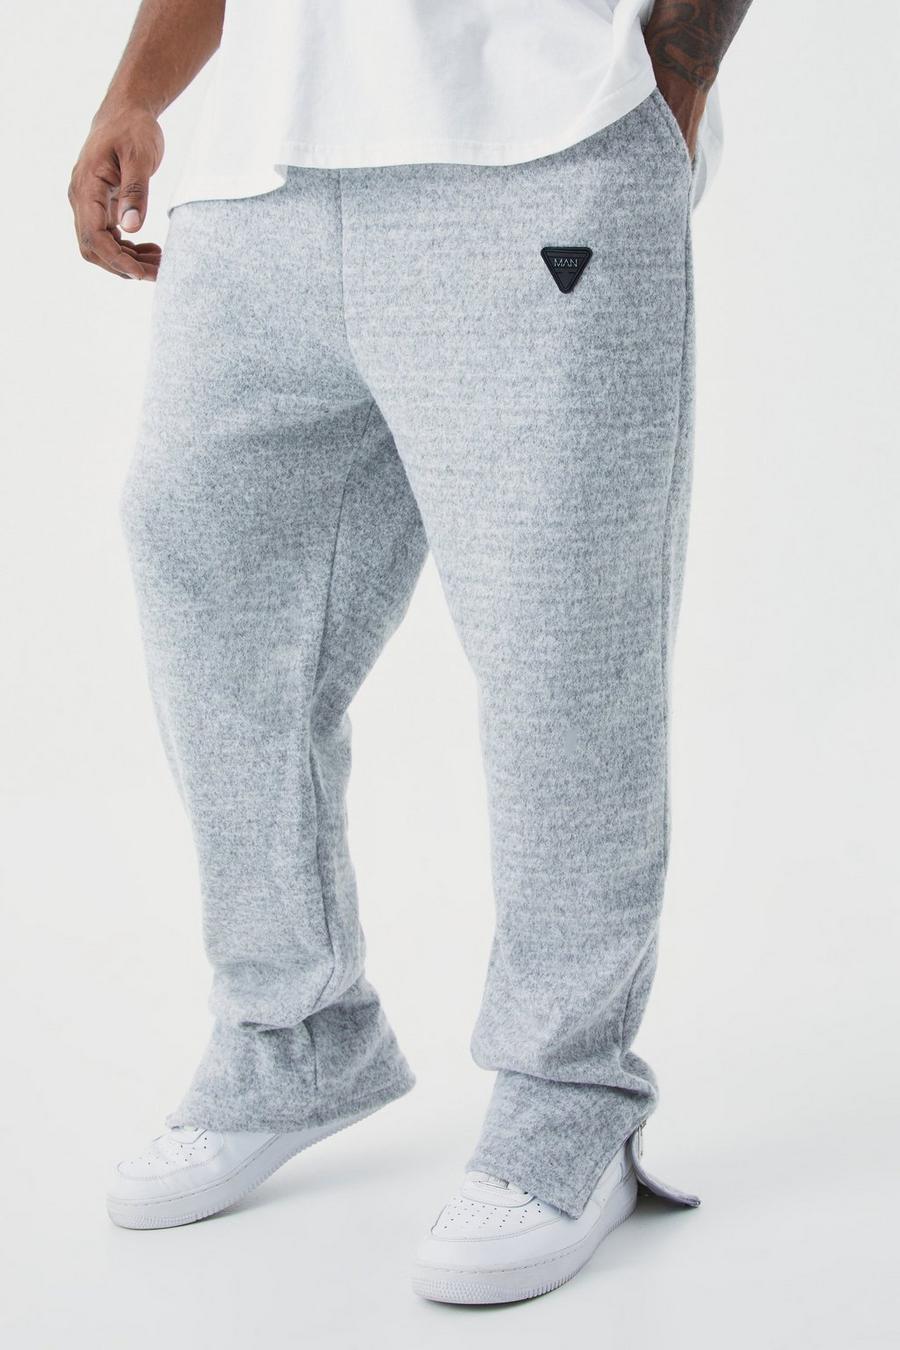 Relaxed Fit Sweatpants - Grey marl - Men